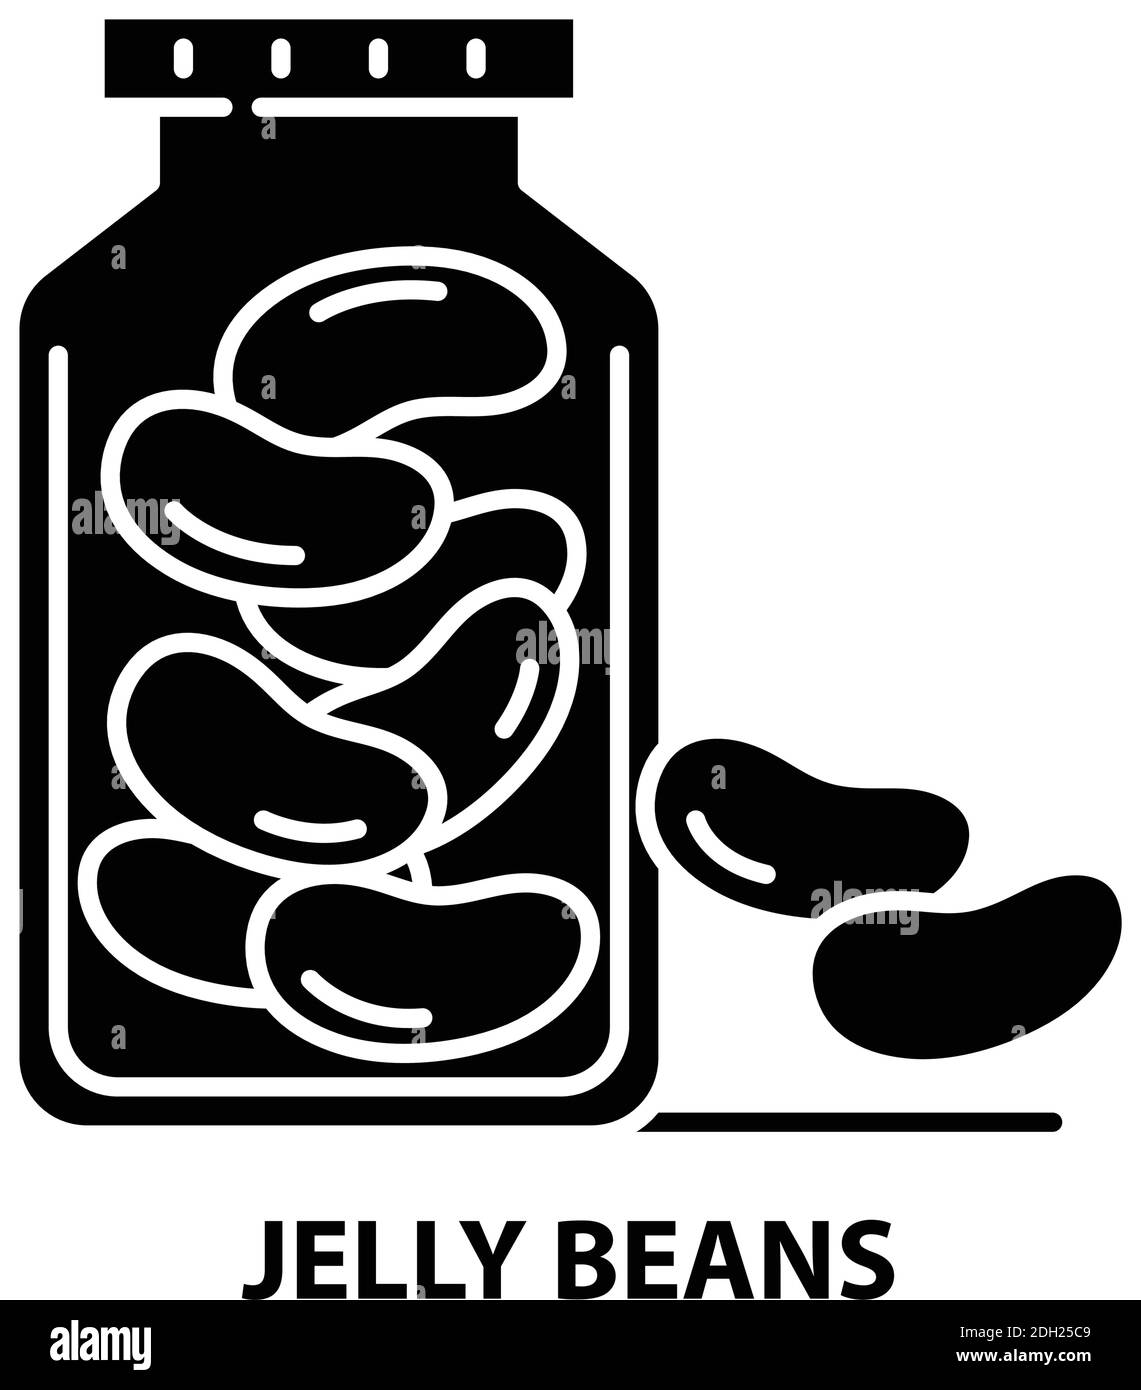 jelly beans icon, black vector sign with editable strokes, concept illustration Stock Vector